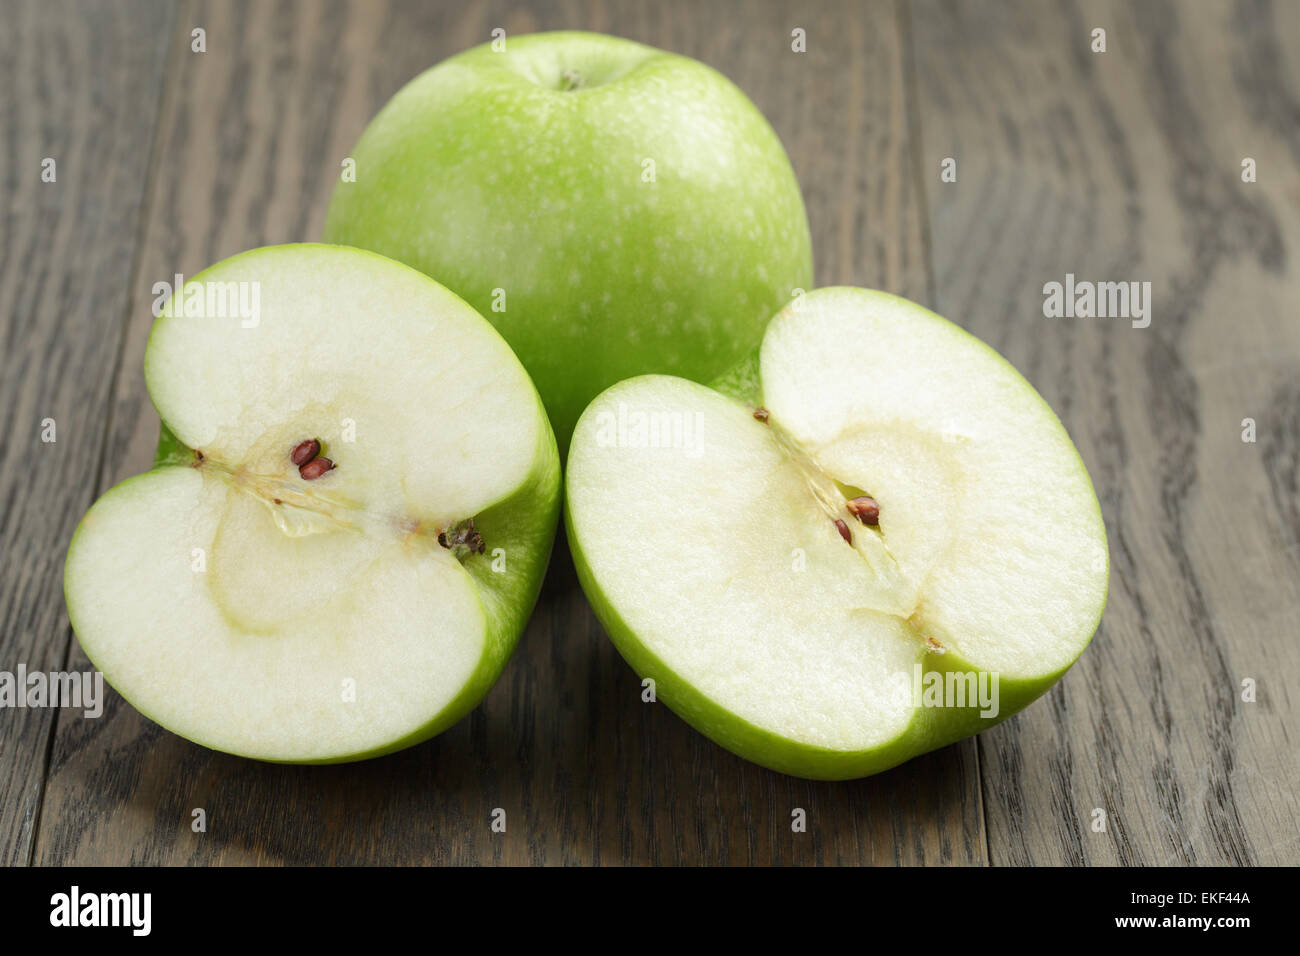 green sour apple on wood table sliced Stock Photo